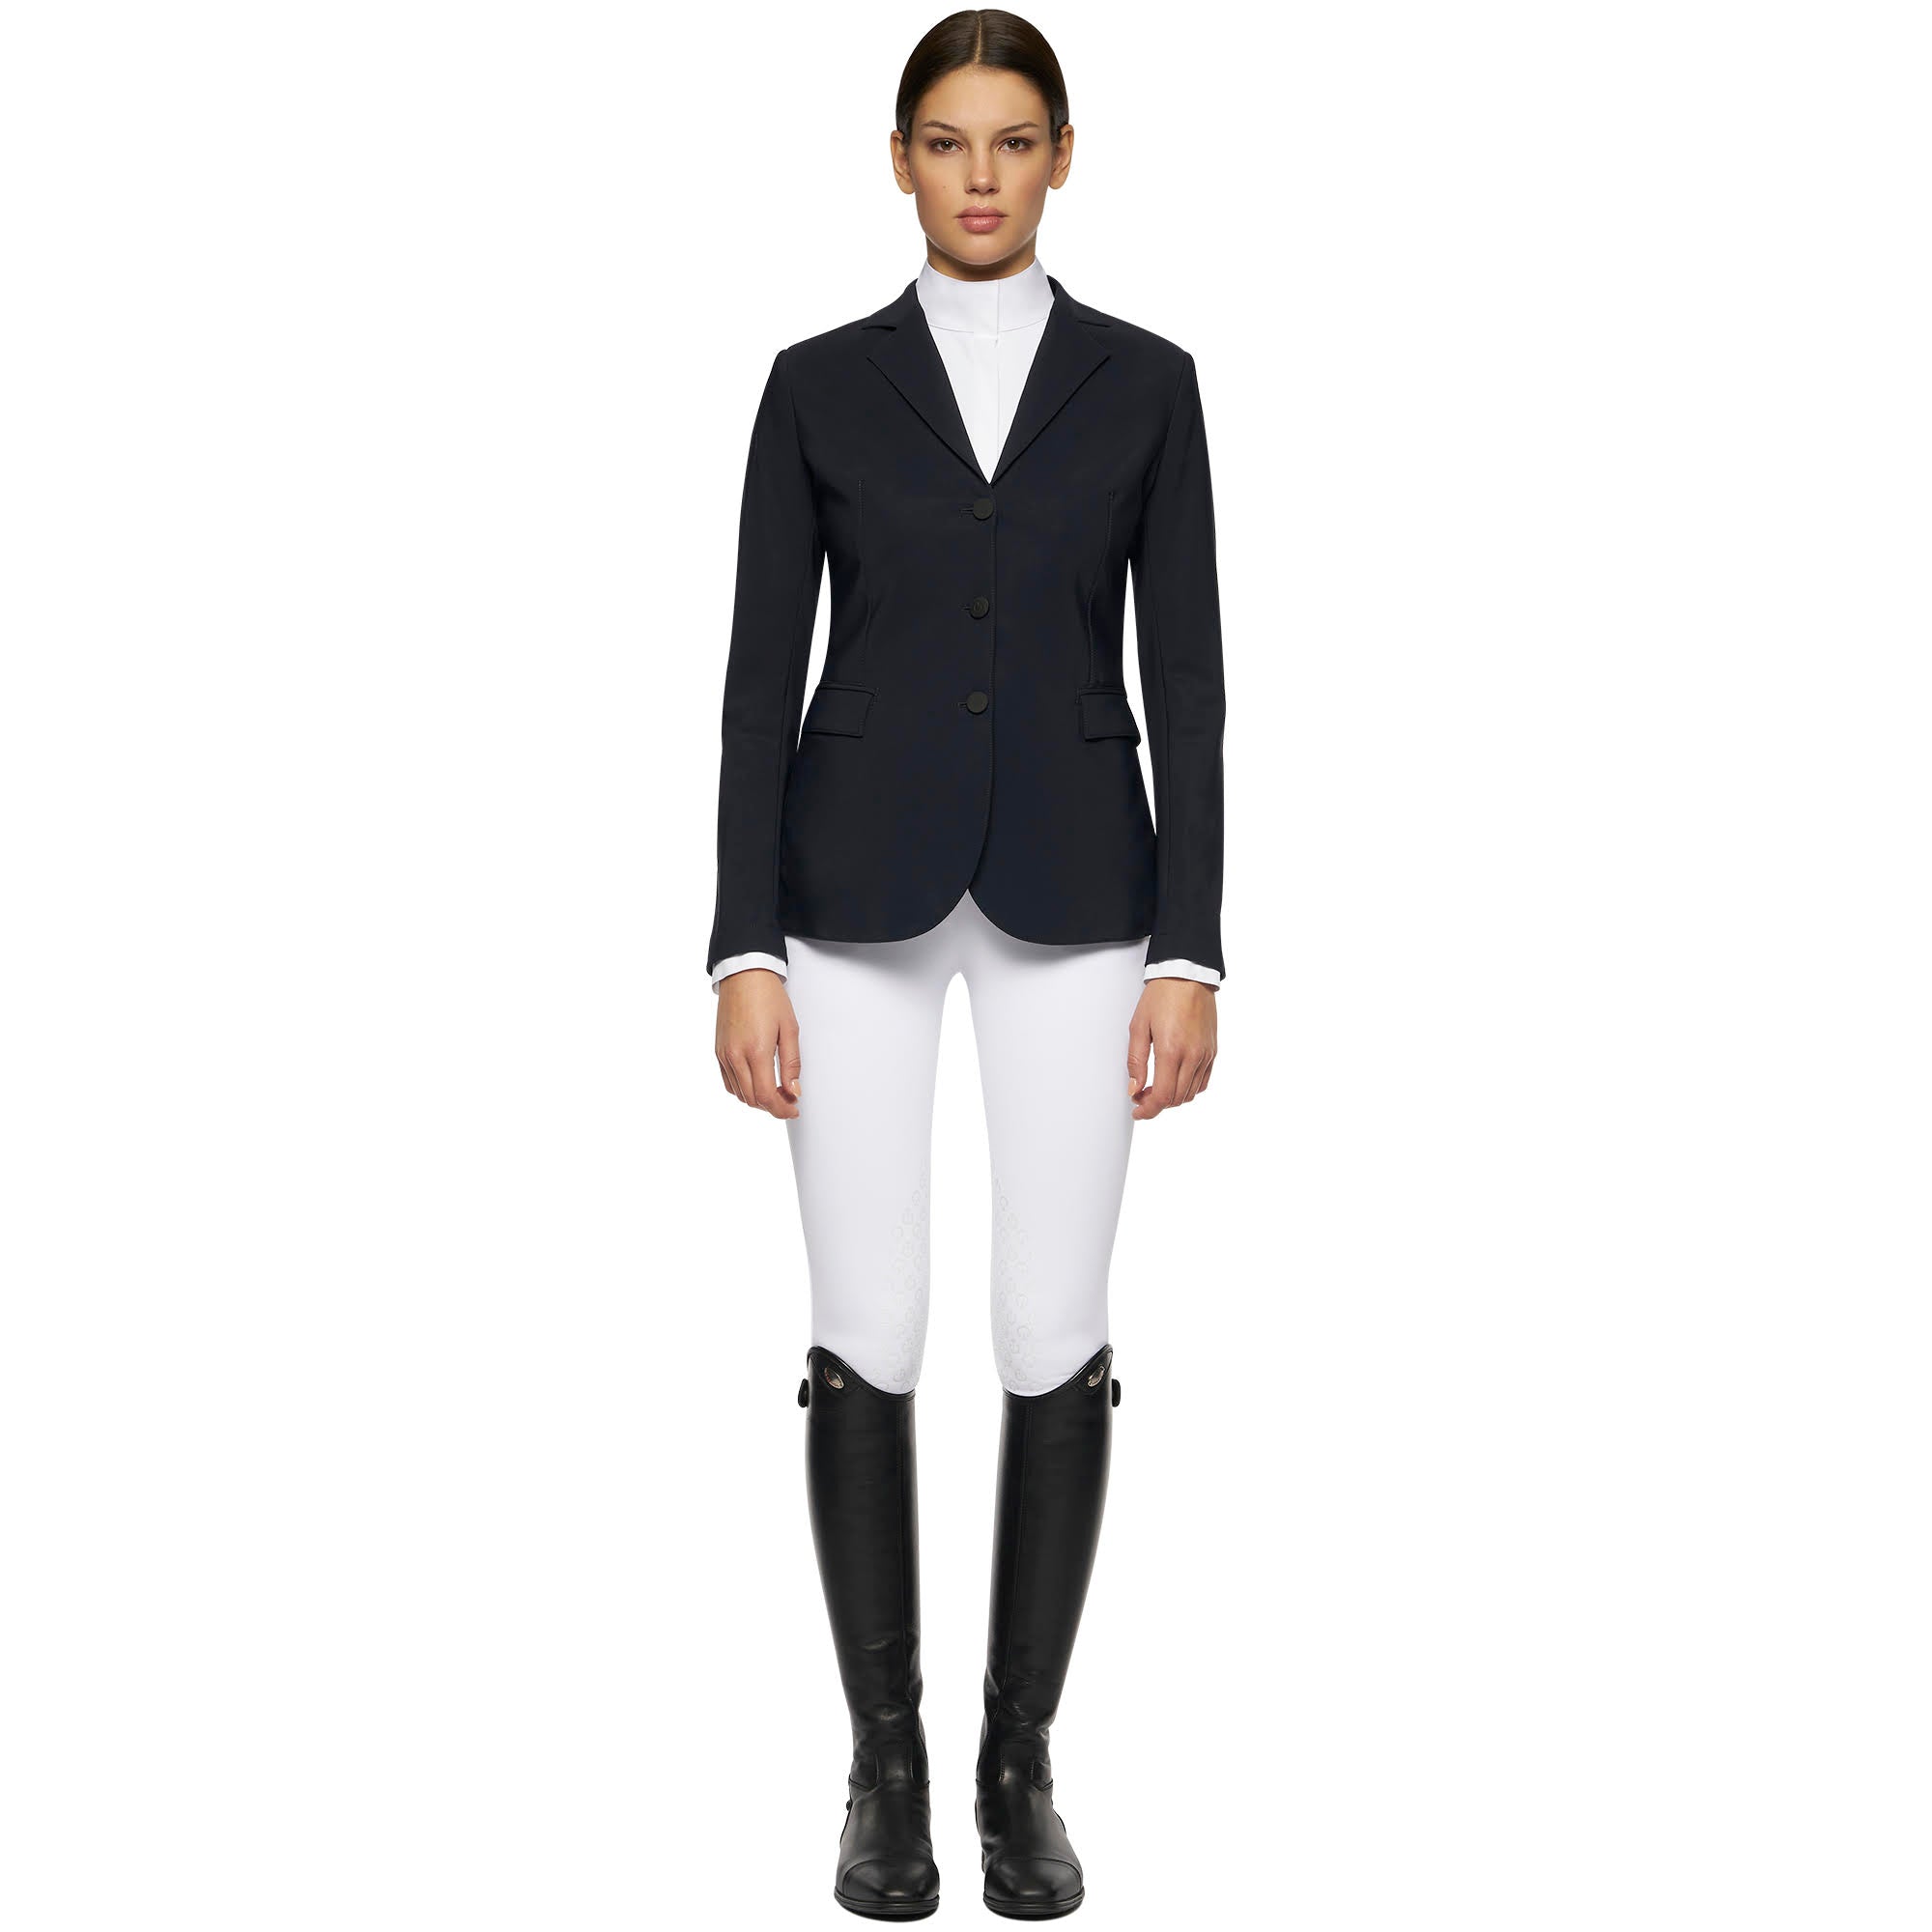 Gee Gee Equine Cavalleria Toscana American Riding Show Coat in Olive and Navy - Dressage Apparel